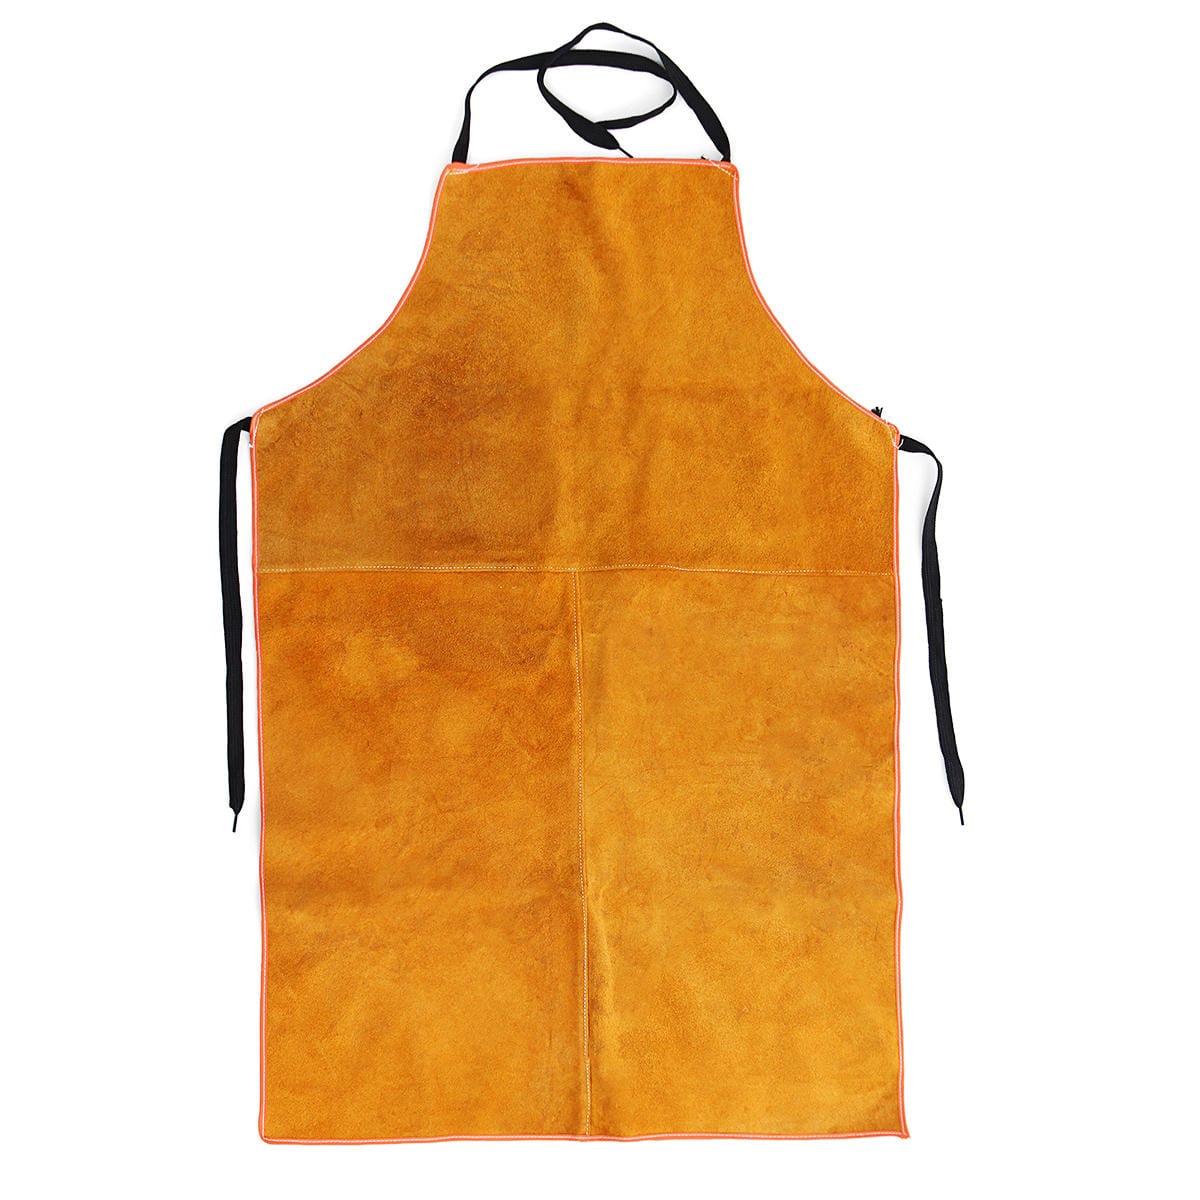 Leather Welding Apron - High Quality Protection for Welding Operations | Supply Master | Accra, Ghana Tool Boxes Bags & Belts Buy Tools hardware Building materials